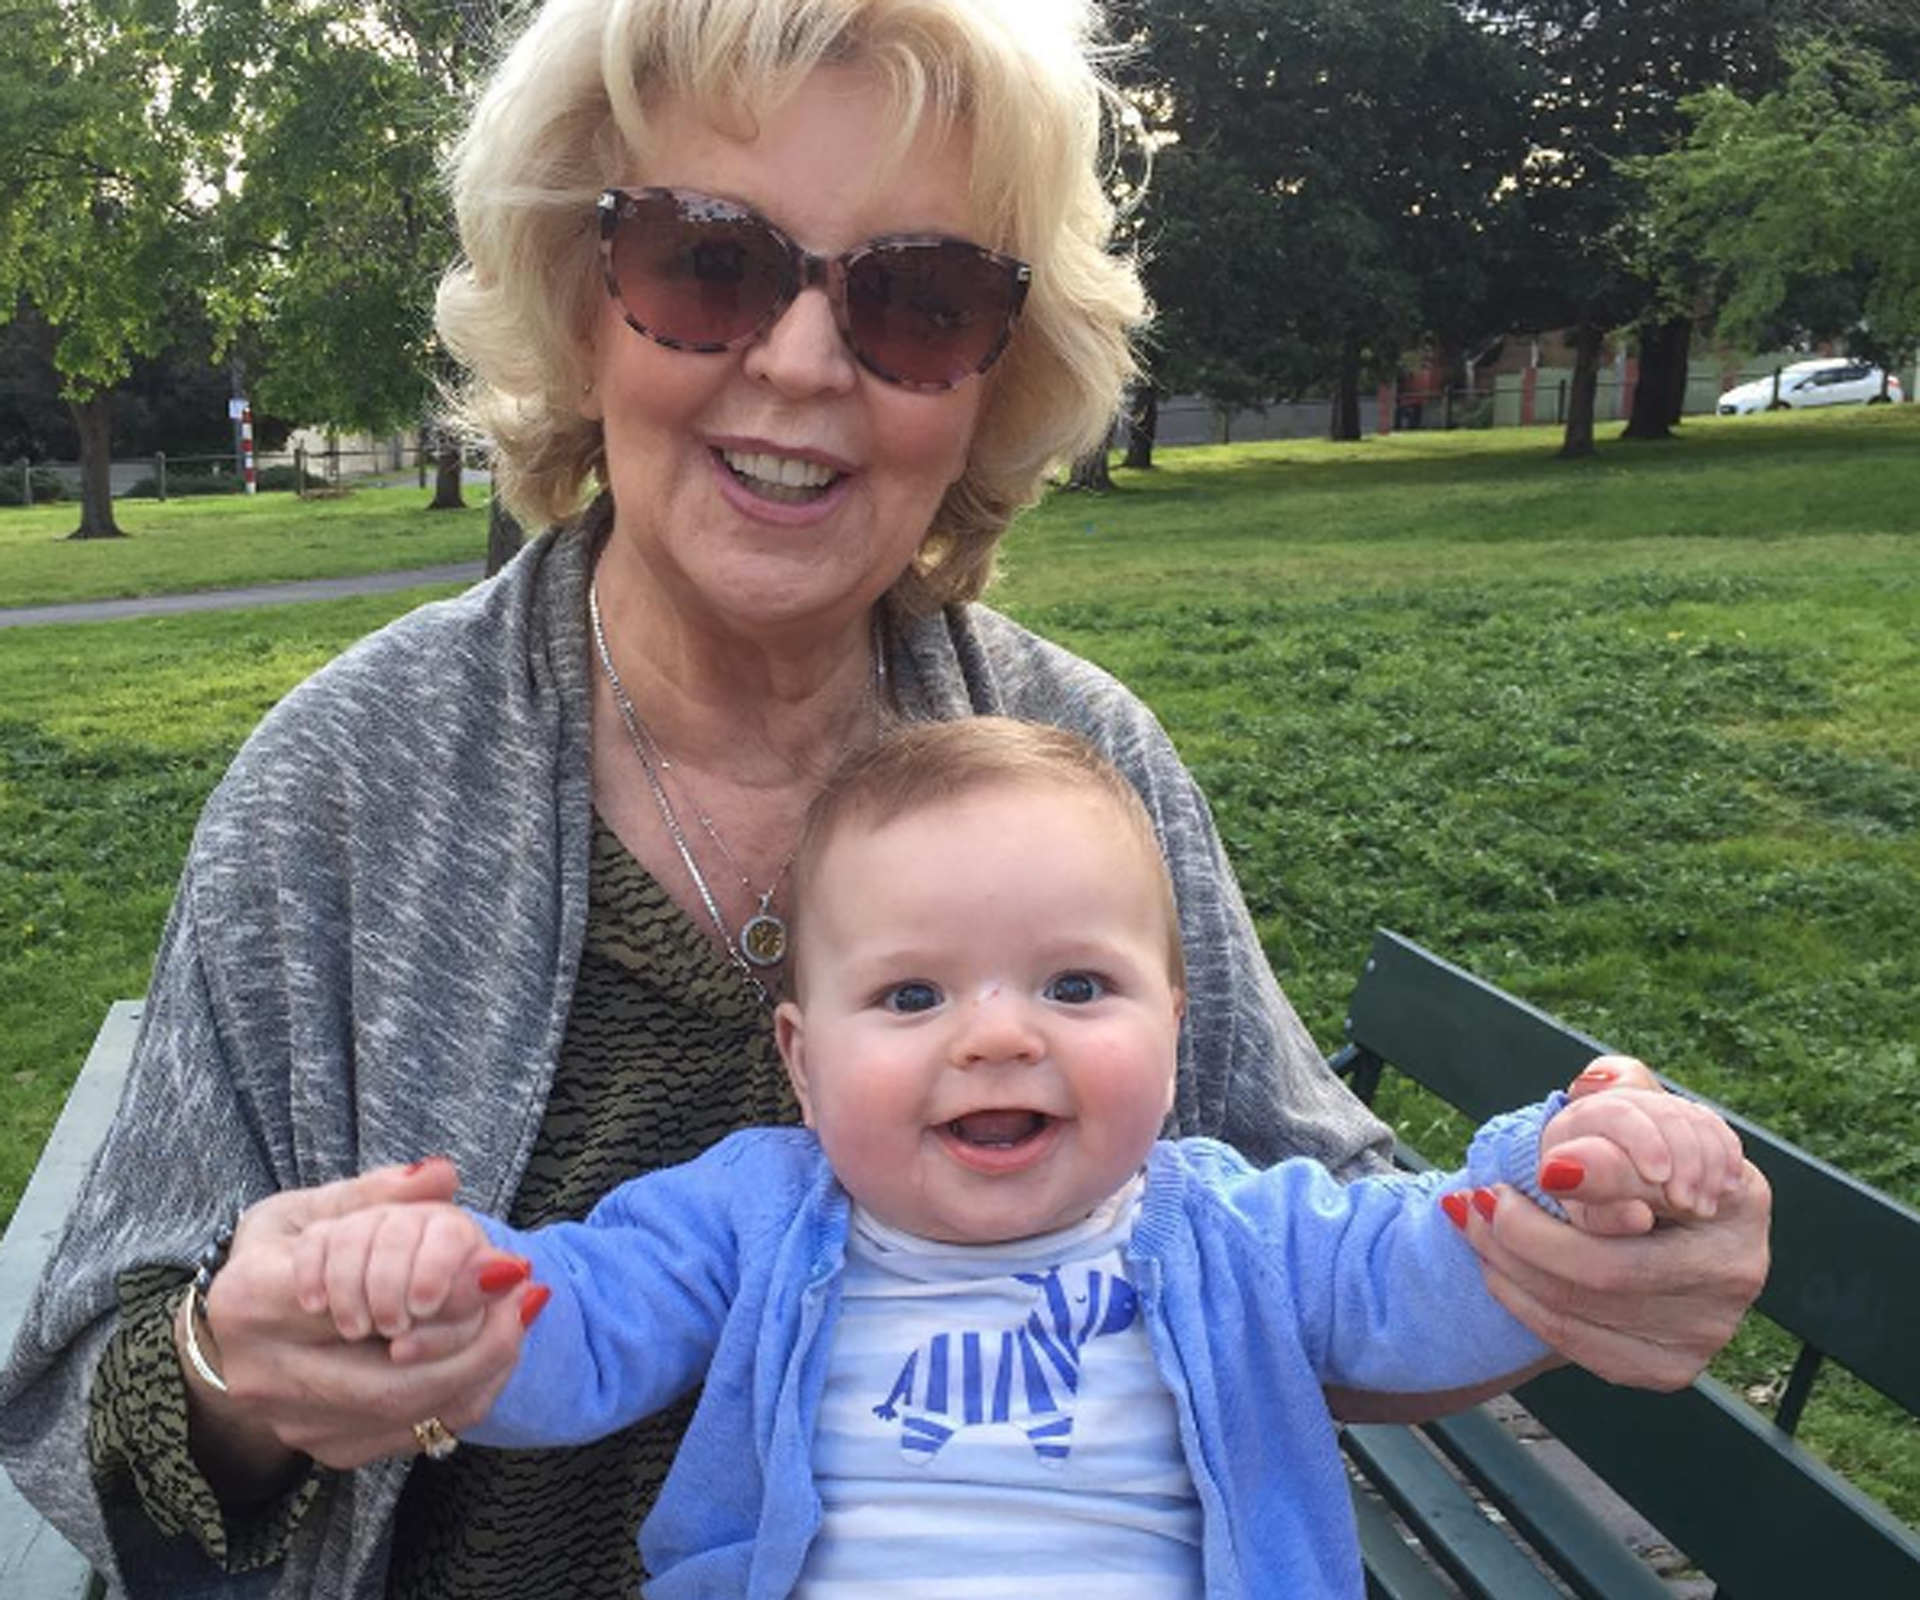 “I’m so lucky to have them”: Patti Newton gushes over her grandkids